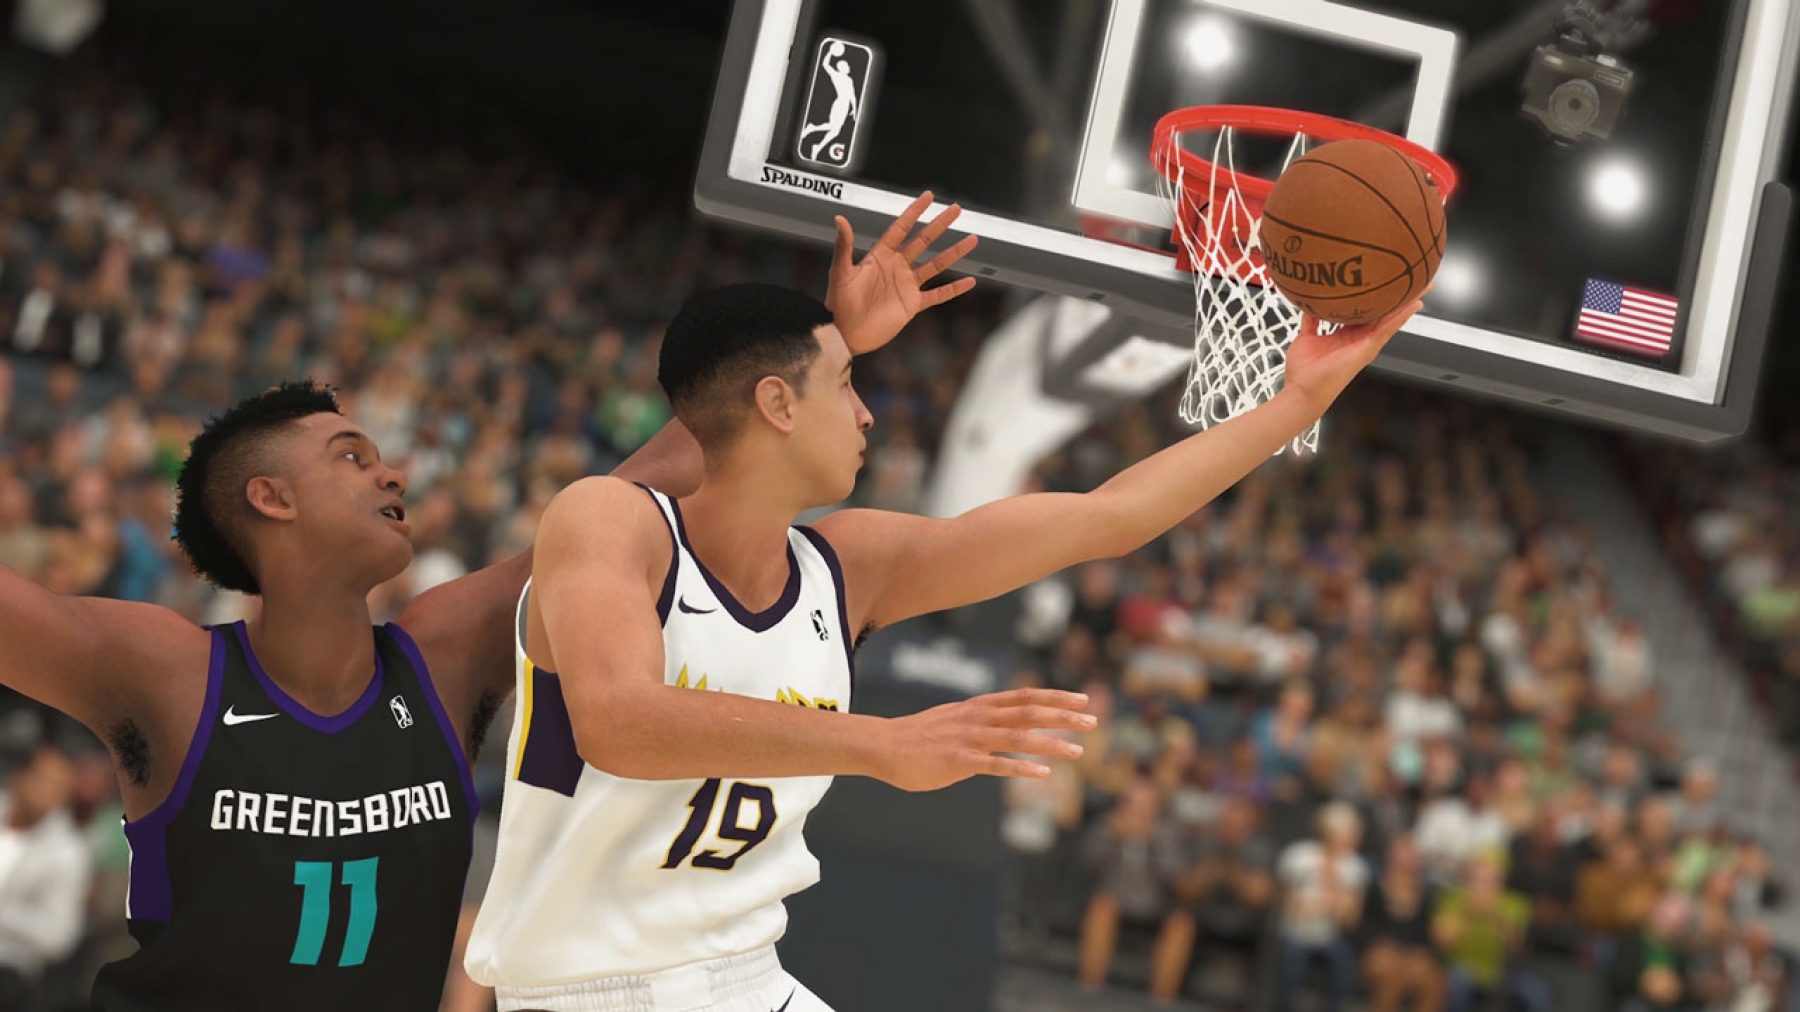 download nba 2k19 prelude for free